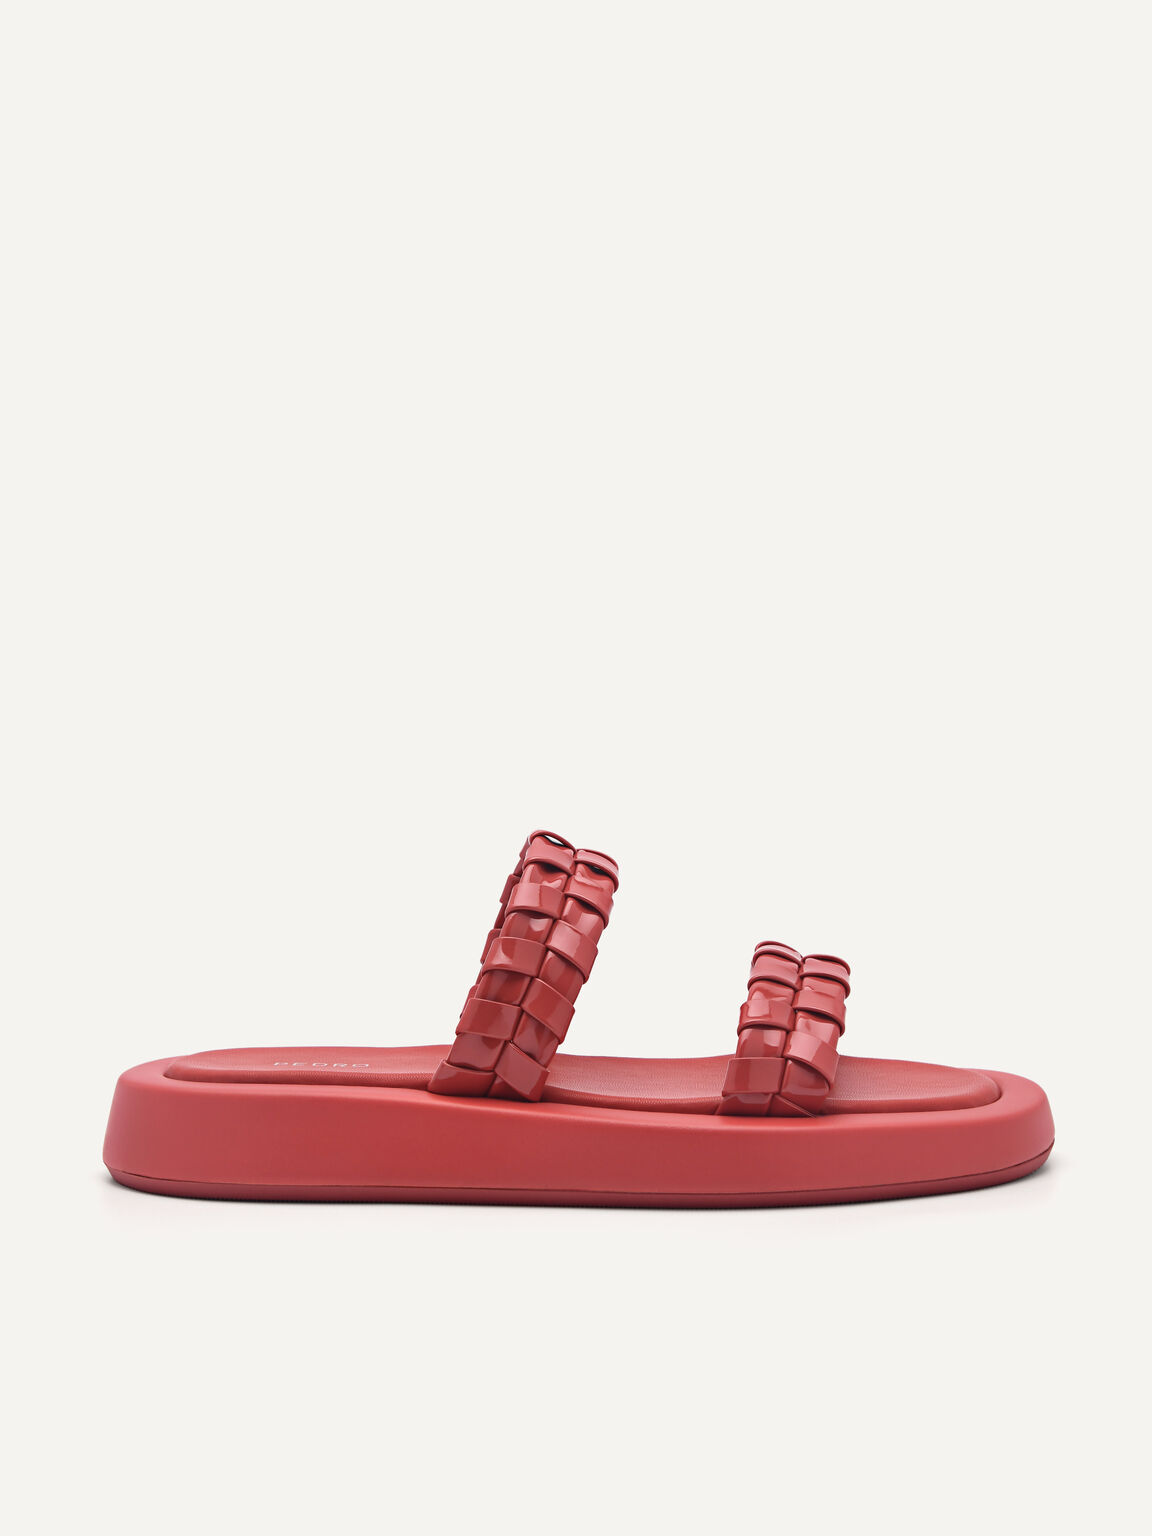 Palma Woven Sandals, Red